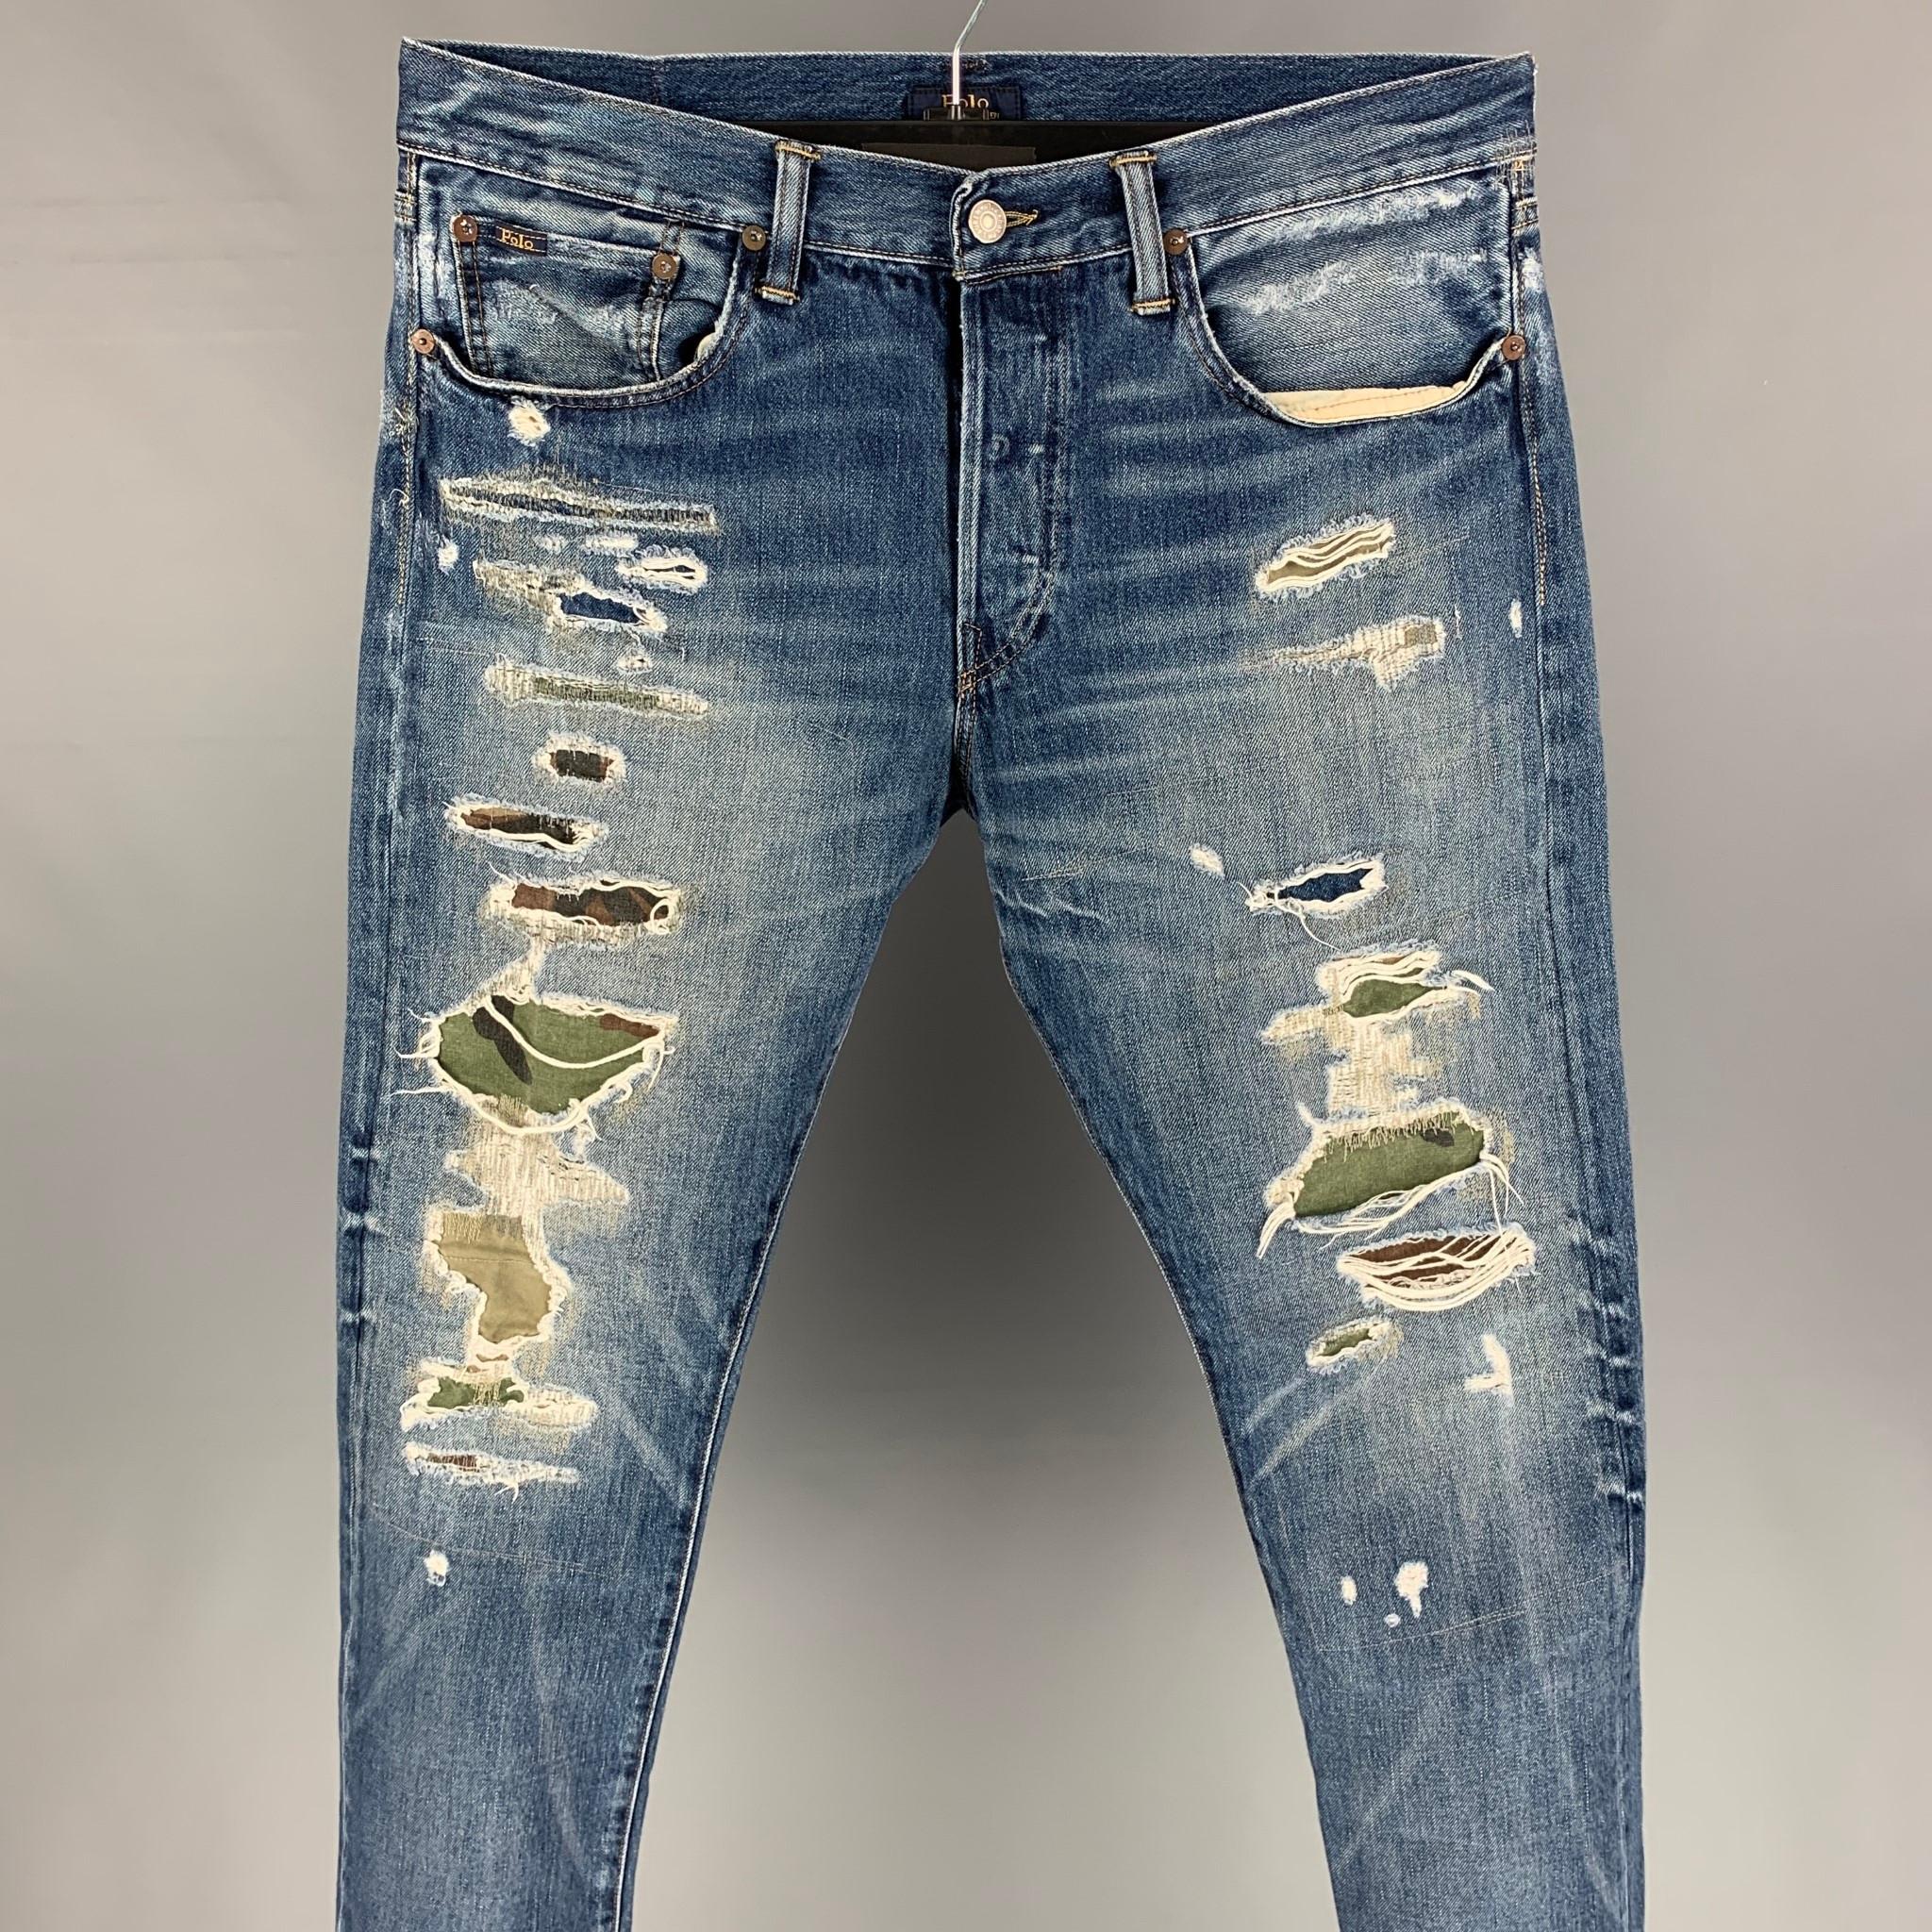 POLO by RALPH LAUREN jeans comes in a indigo distressed denim featuring a slim fit, camouflage trim, contrast stitching, and a button fly closure. 

Very Good Pre-Owned Condition.
Marked: 33x30

Measurements:

Waist: 33 in.
Rise: 11 in.
Inseam: 30